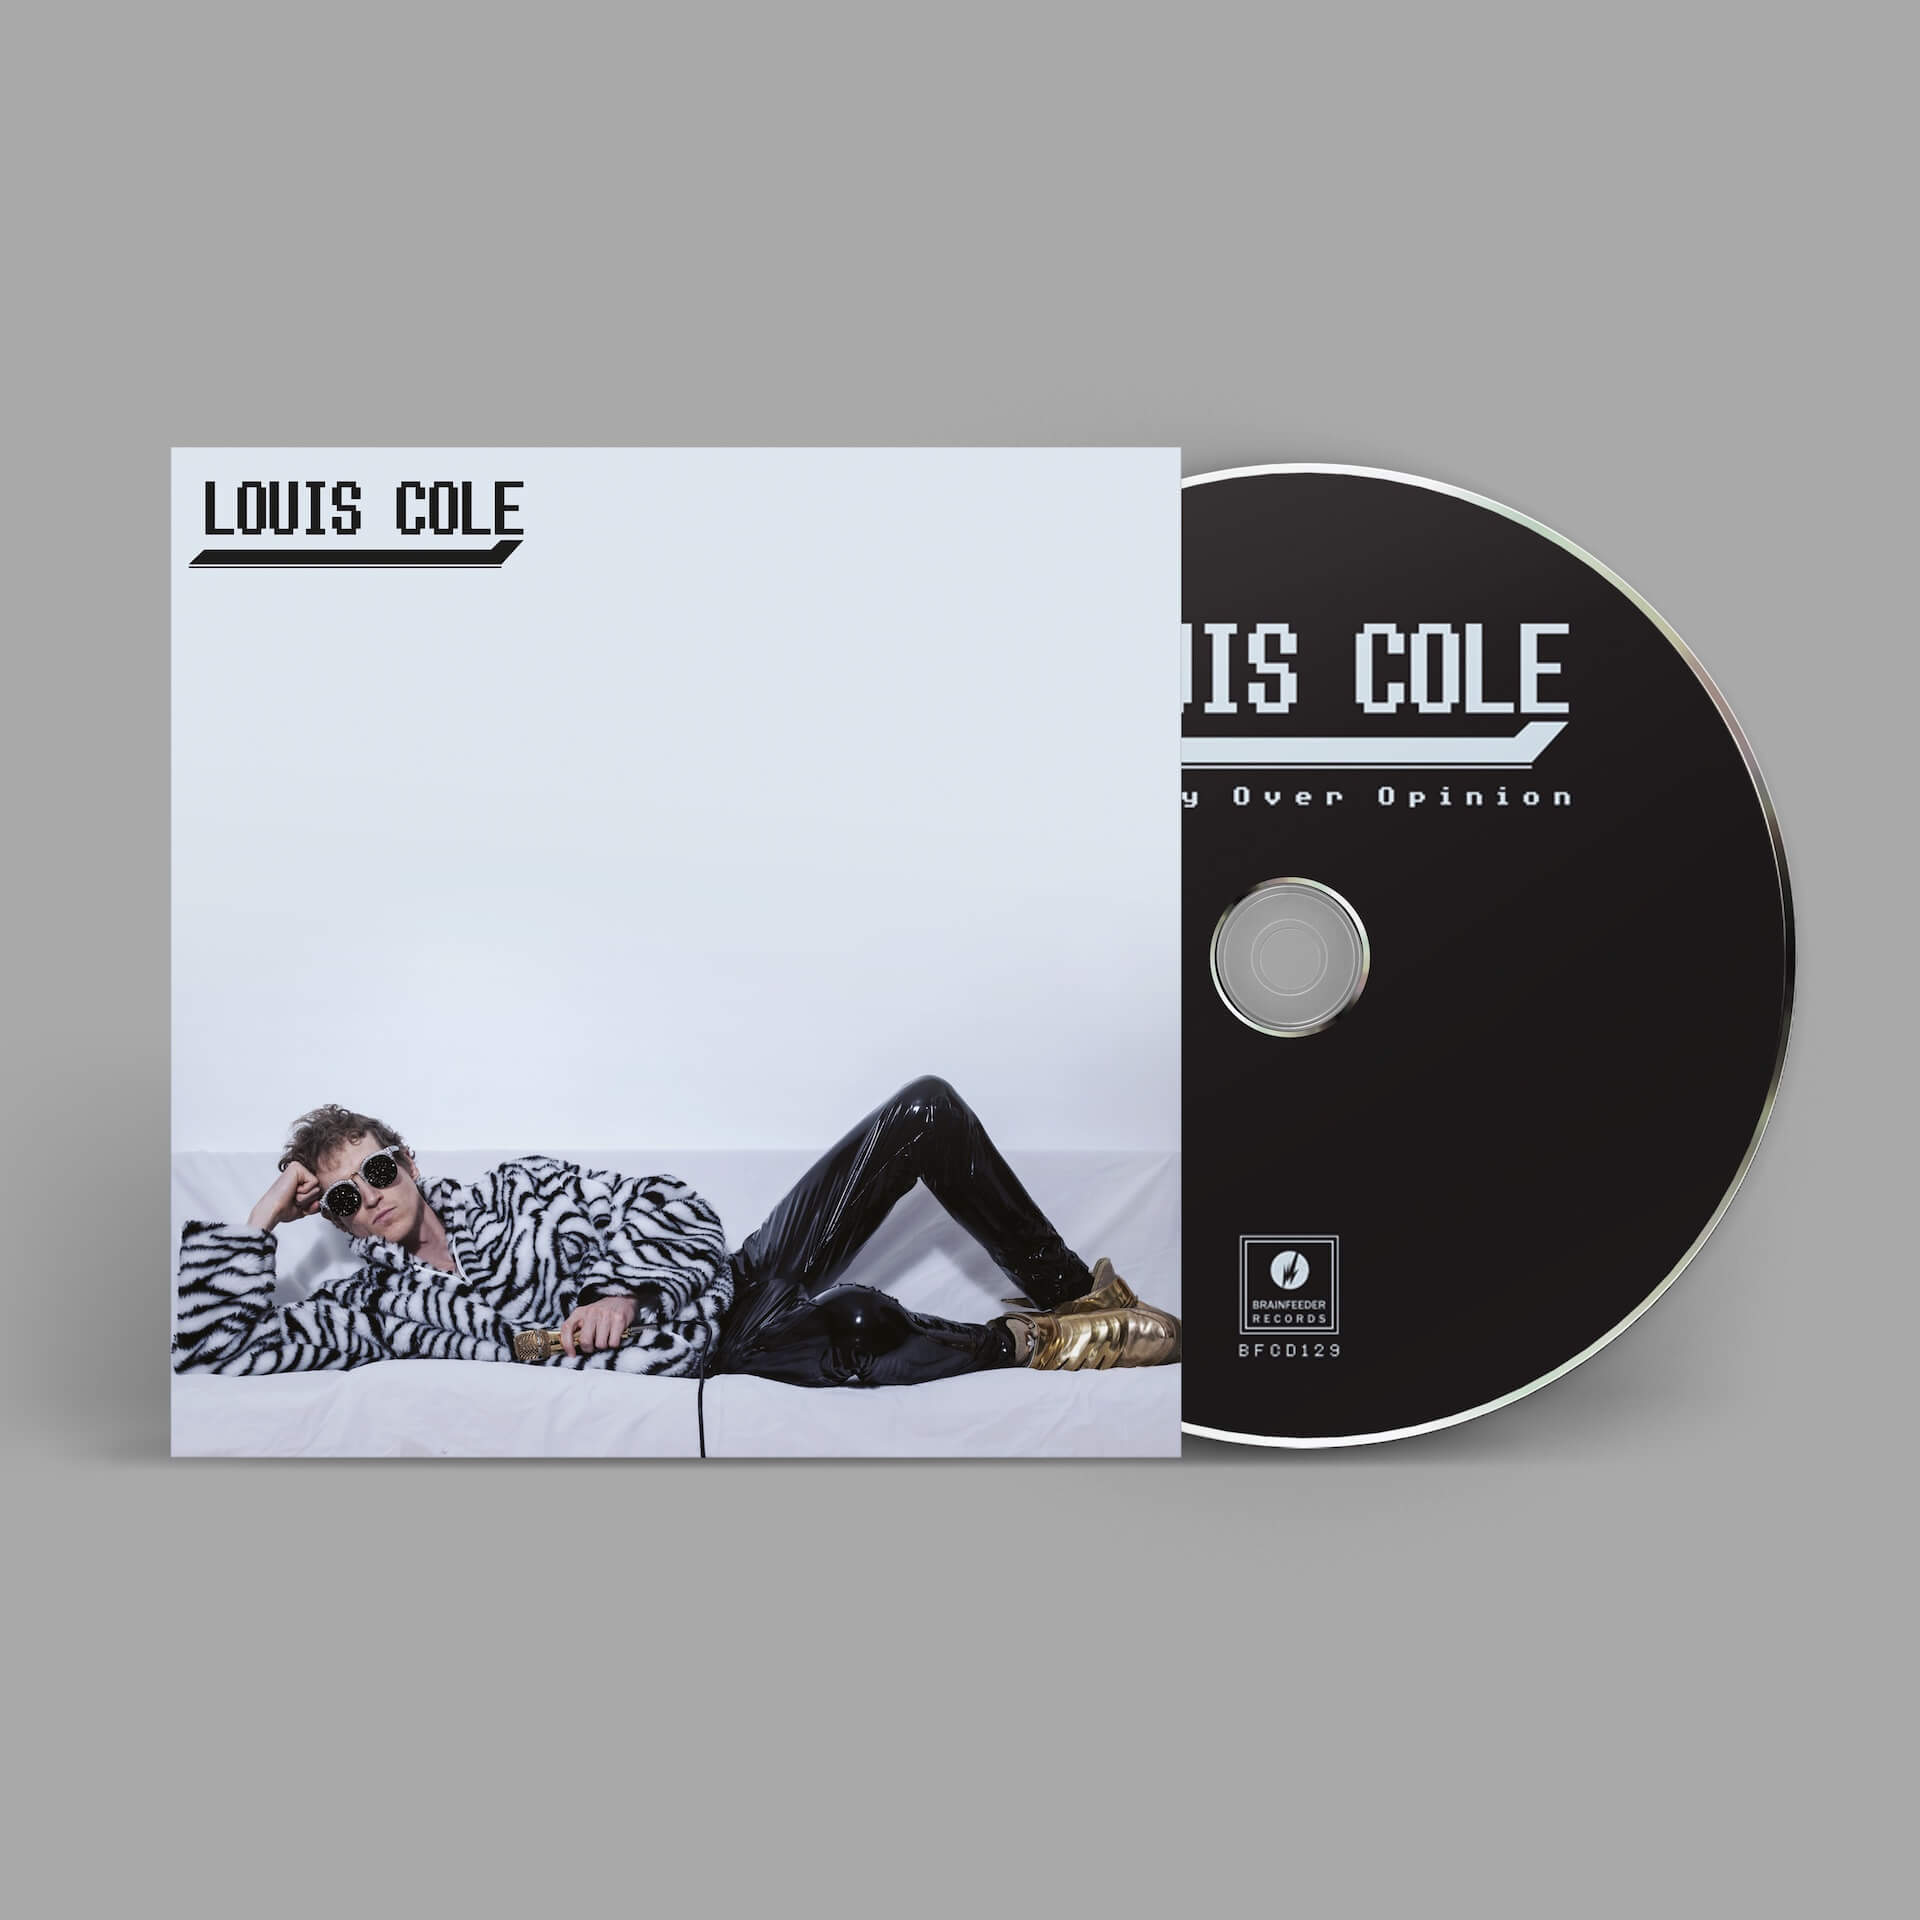 Louis Cole、最新作『Quality Over Opinion』より新曲「Dead Inside Shuffle」公開 BFCD129-MOCKUP